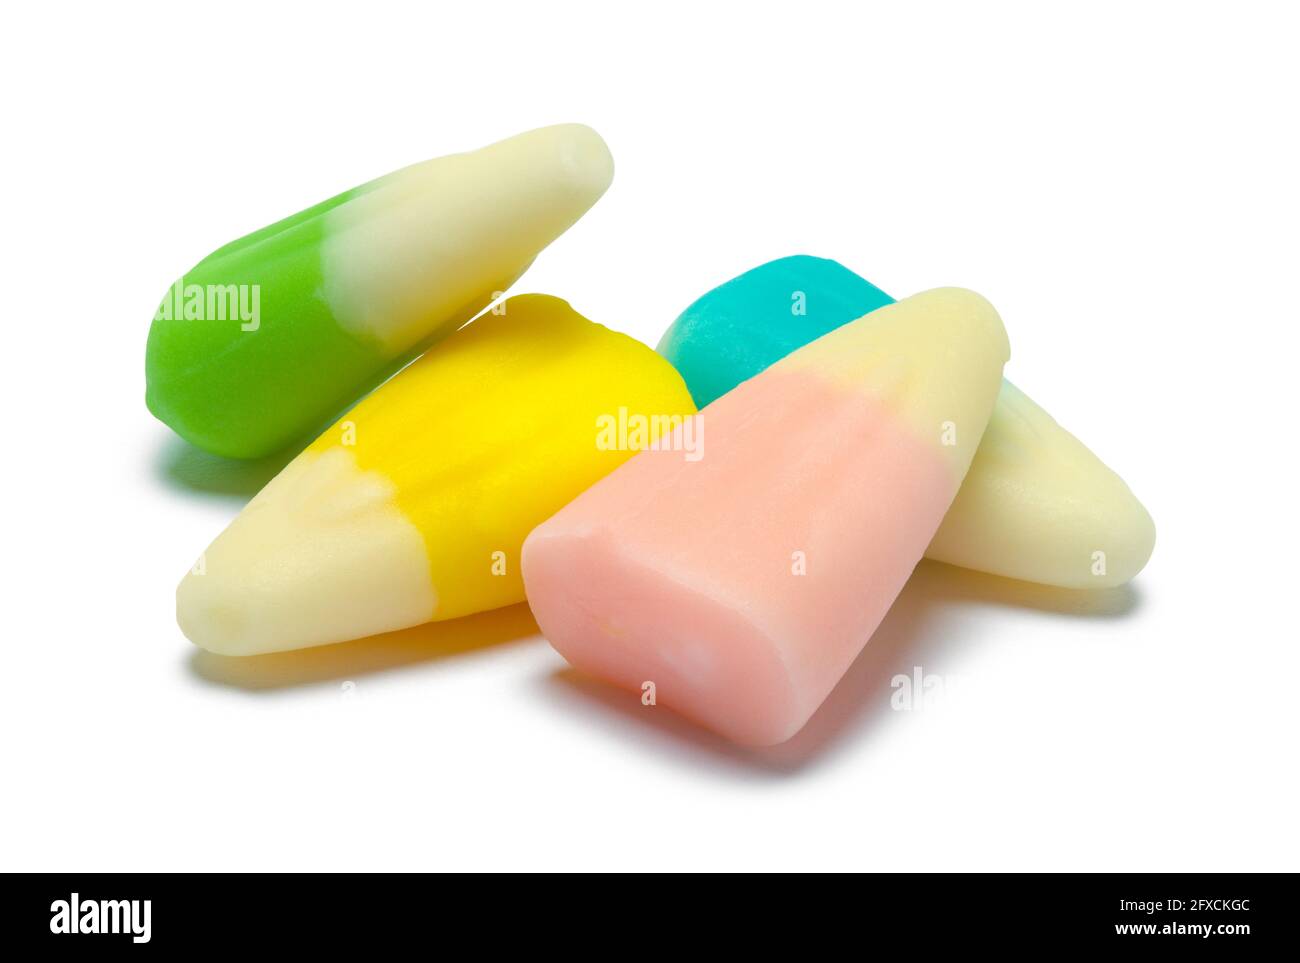 Small Pile of Candy Corn Cut Out on White. Stock Photo